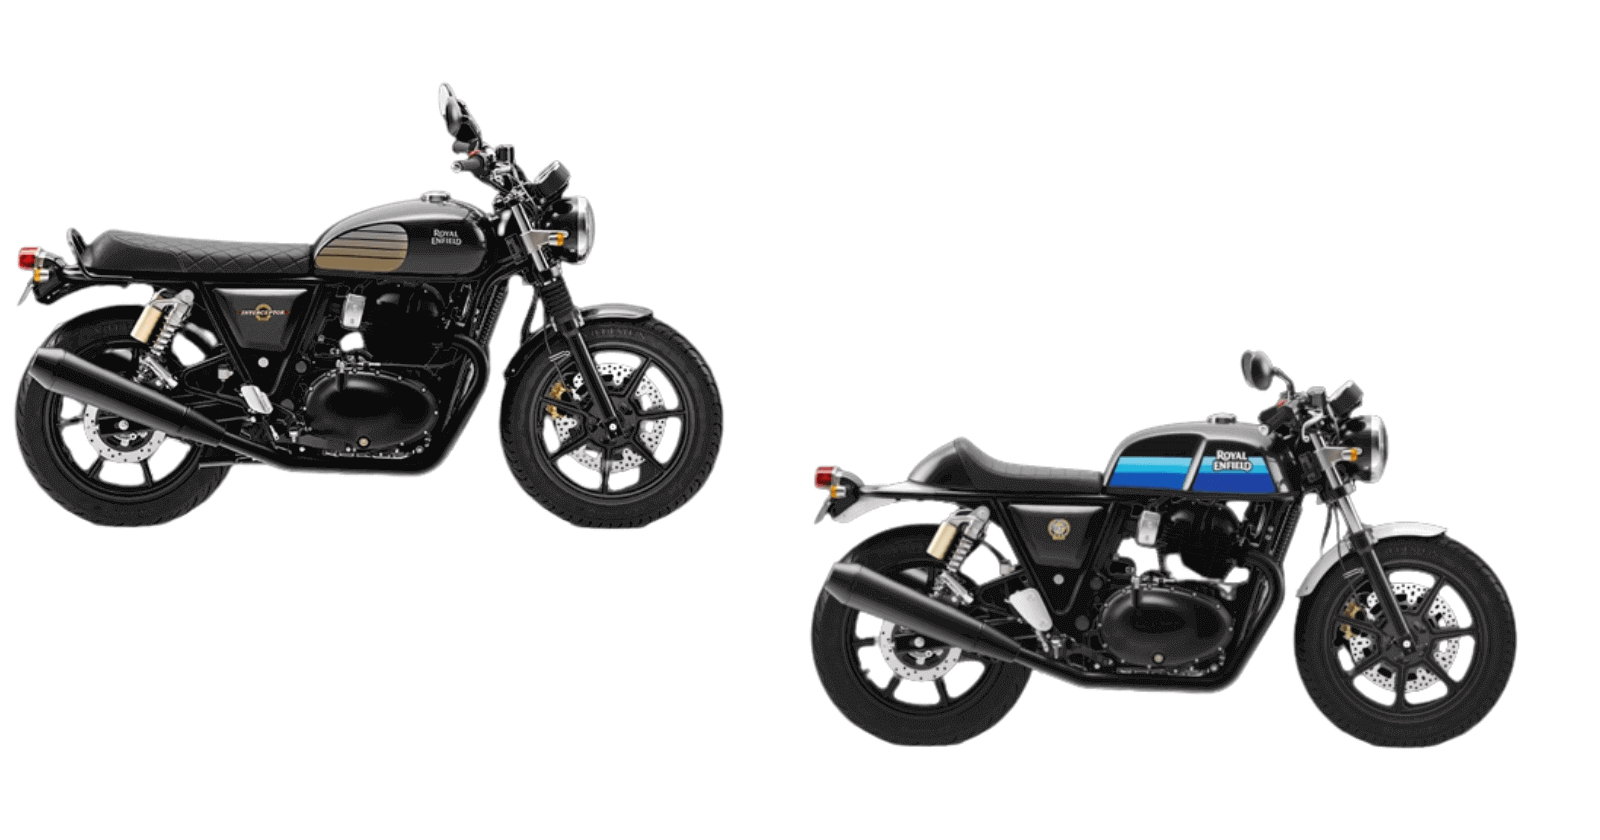  Royal Enfield Continental GT 650 vs Royal Enfield Interceptor 650 | Compare Price, Mileage, Specs & More: [2023 Guide] 